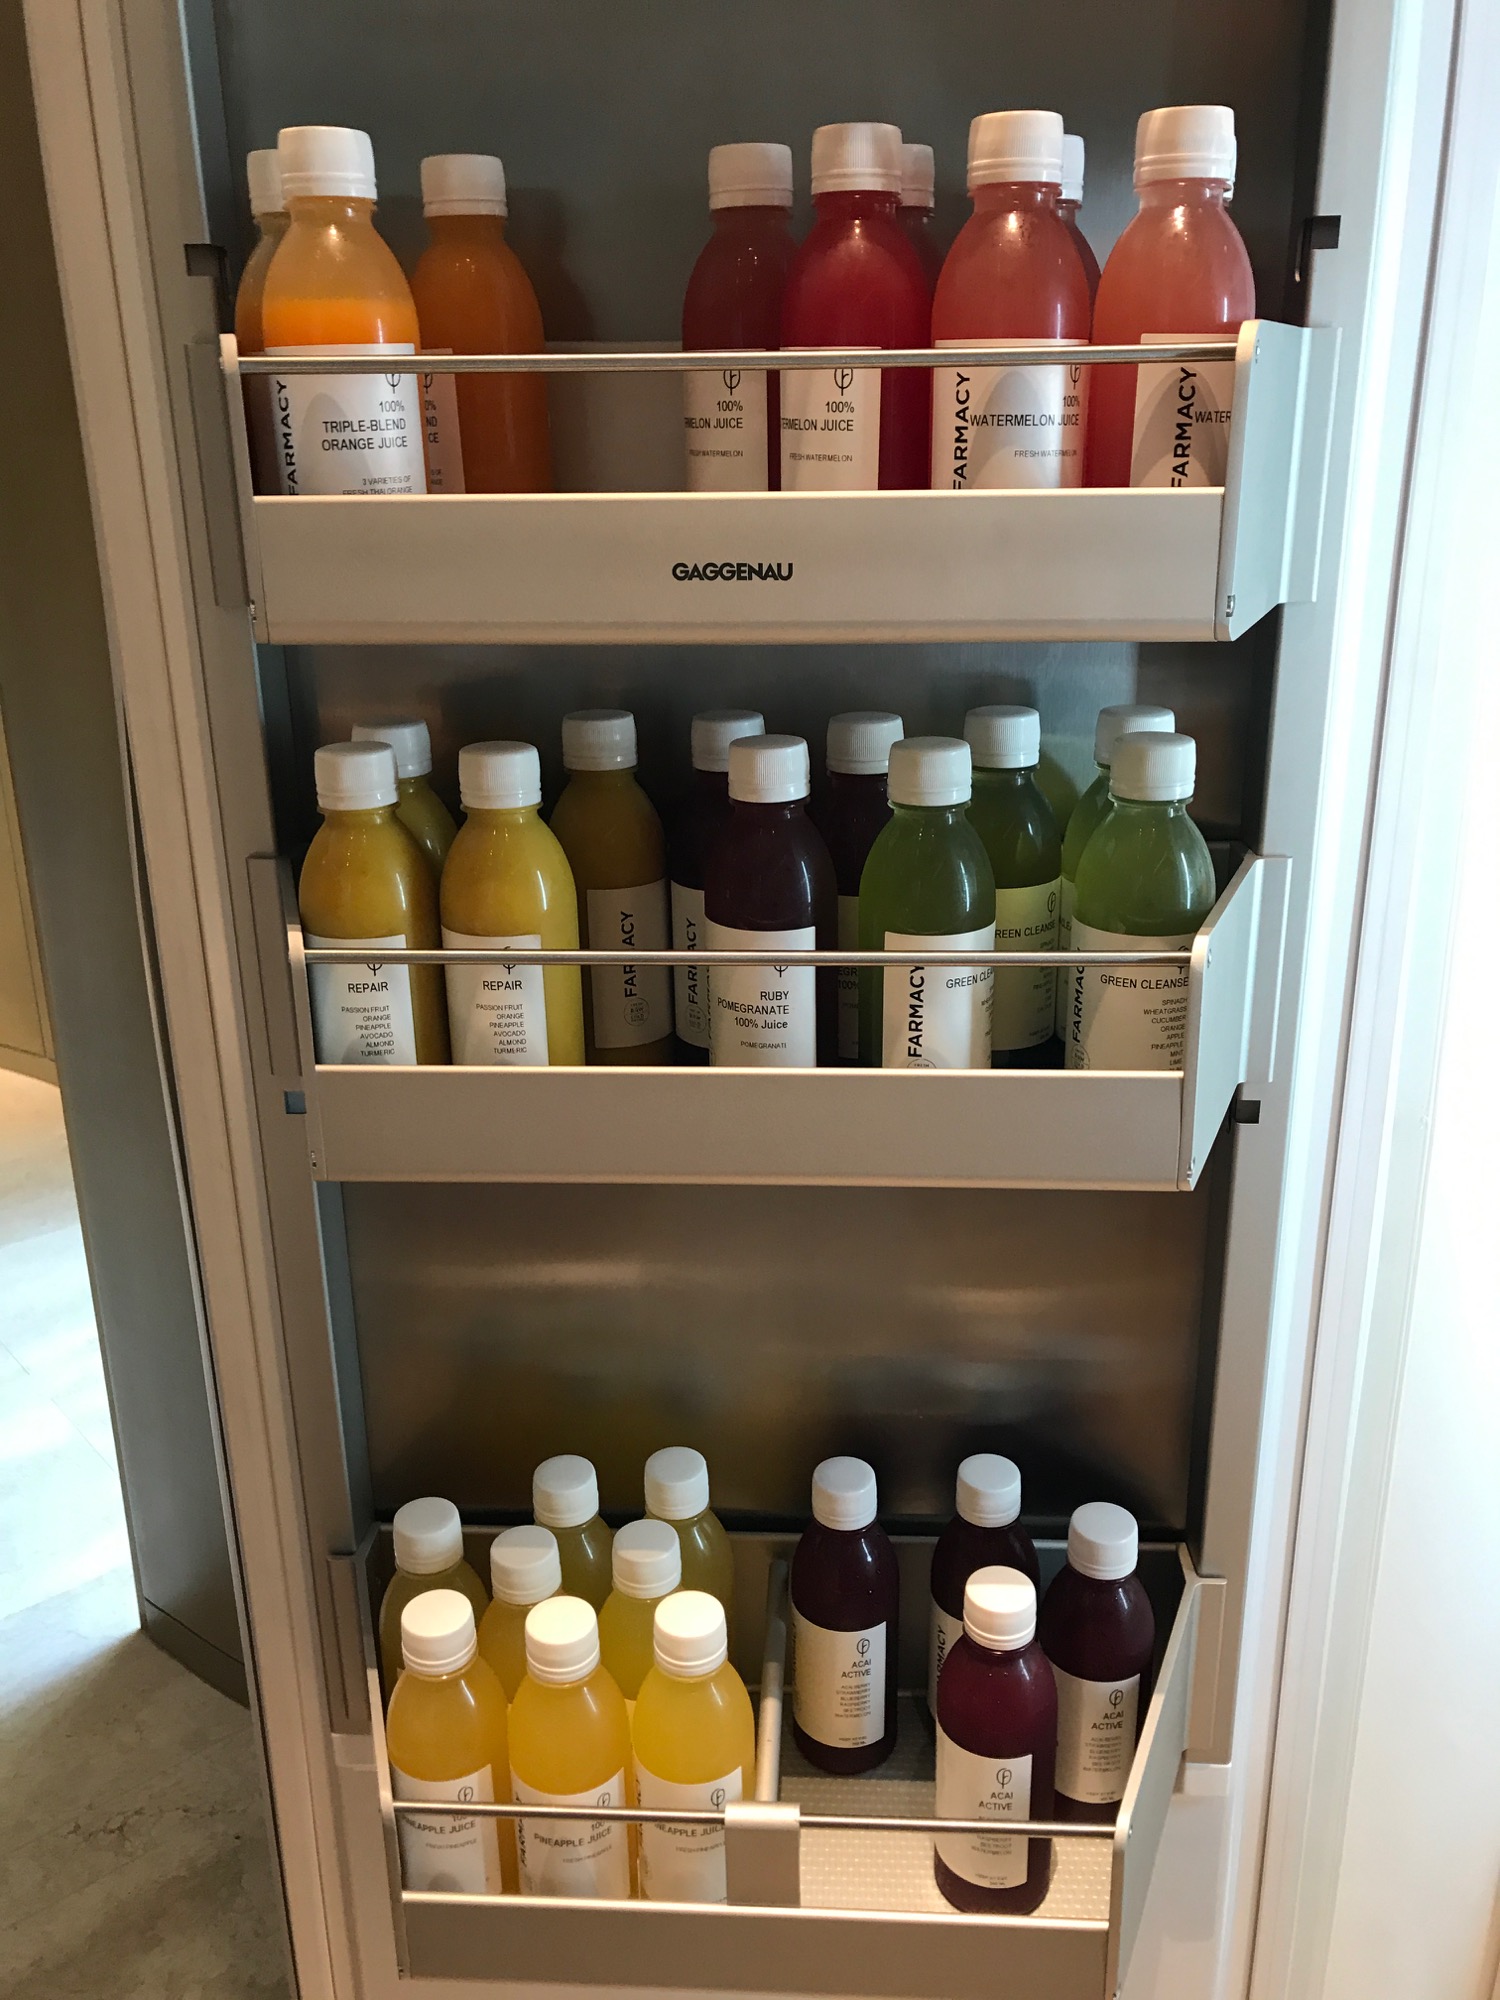 Cold pressed juices, I drank most of those.